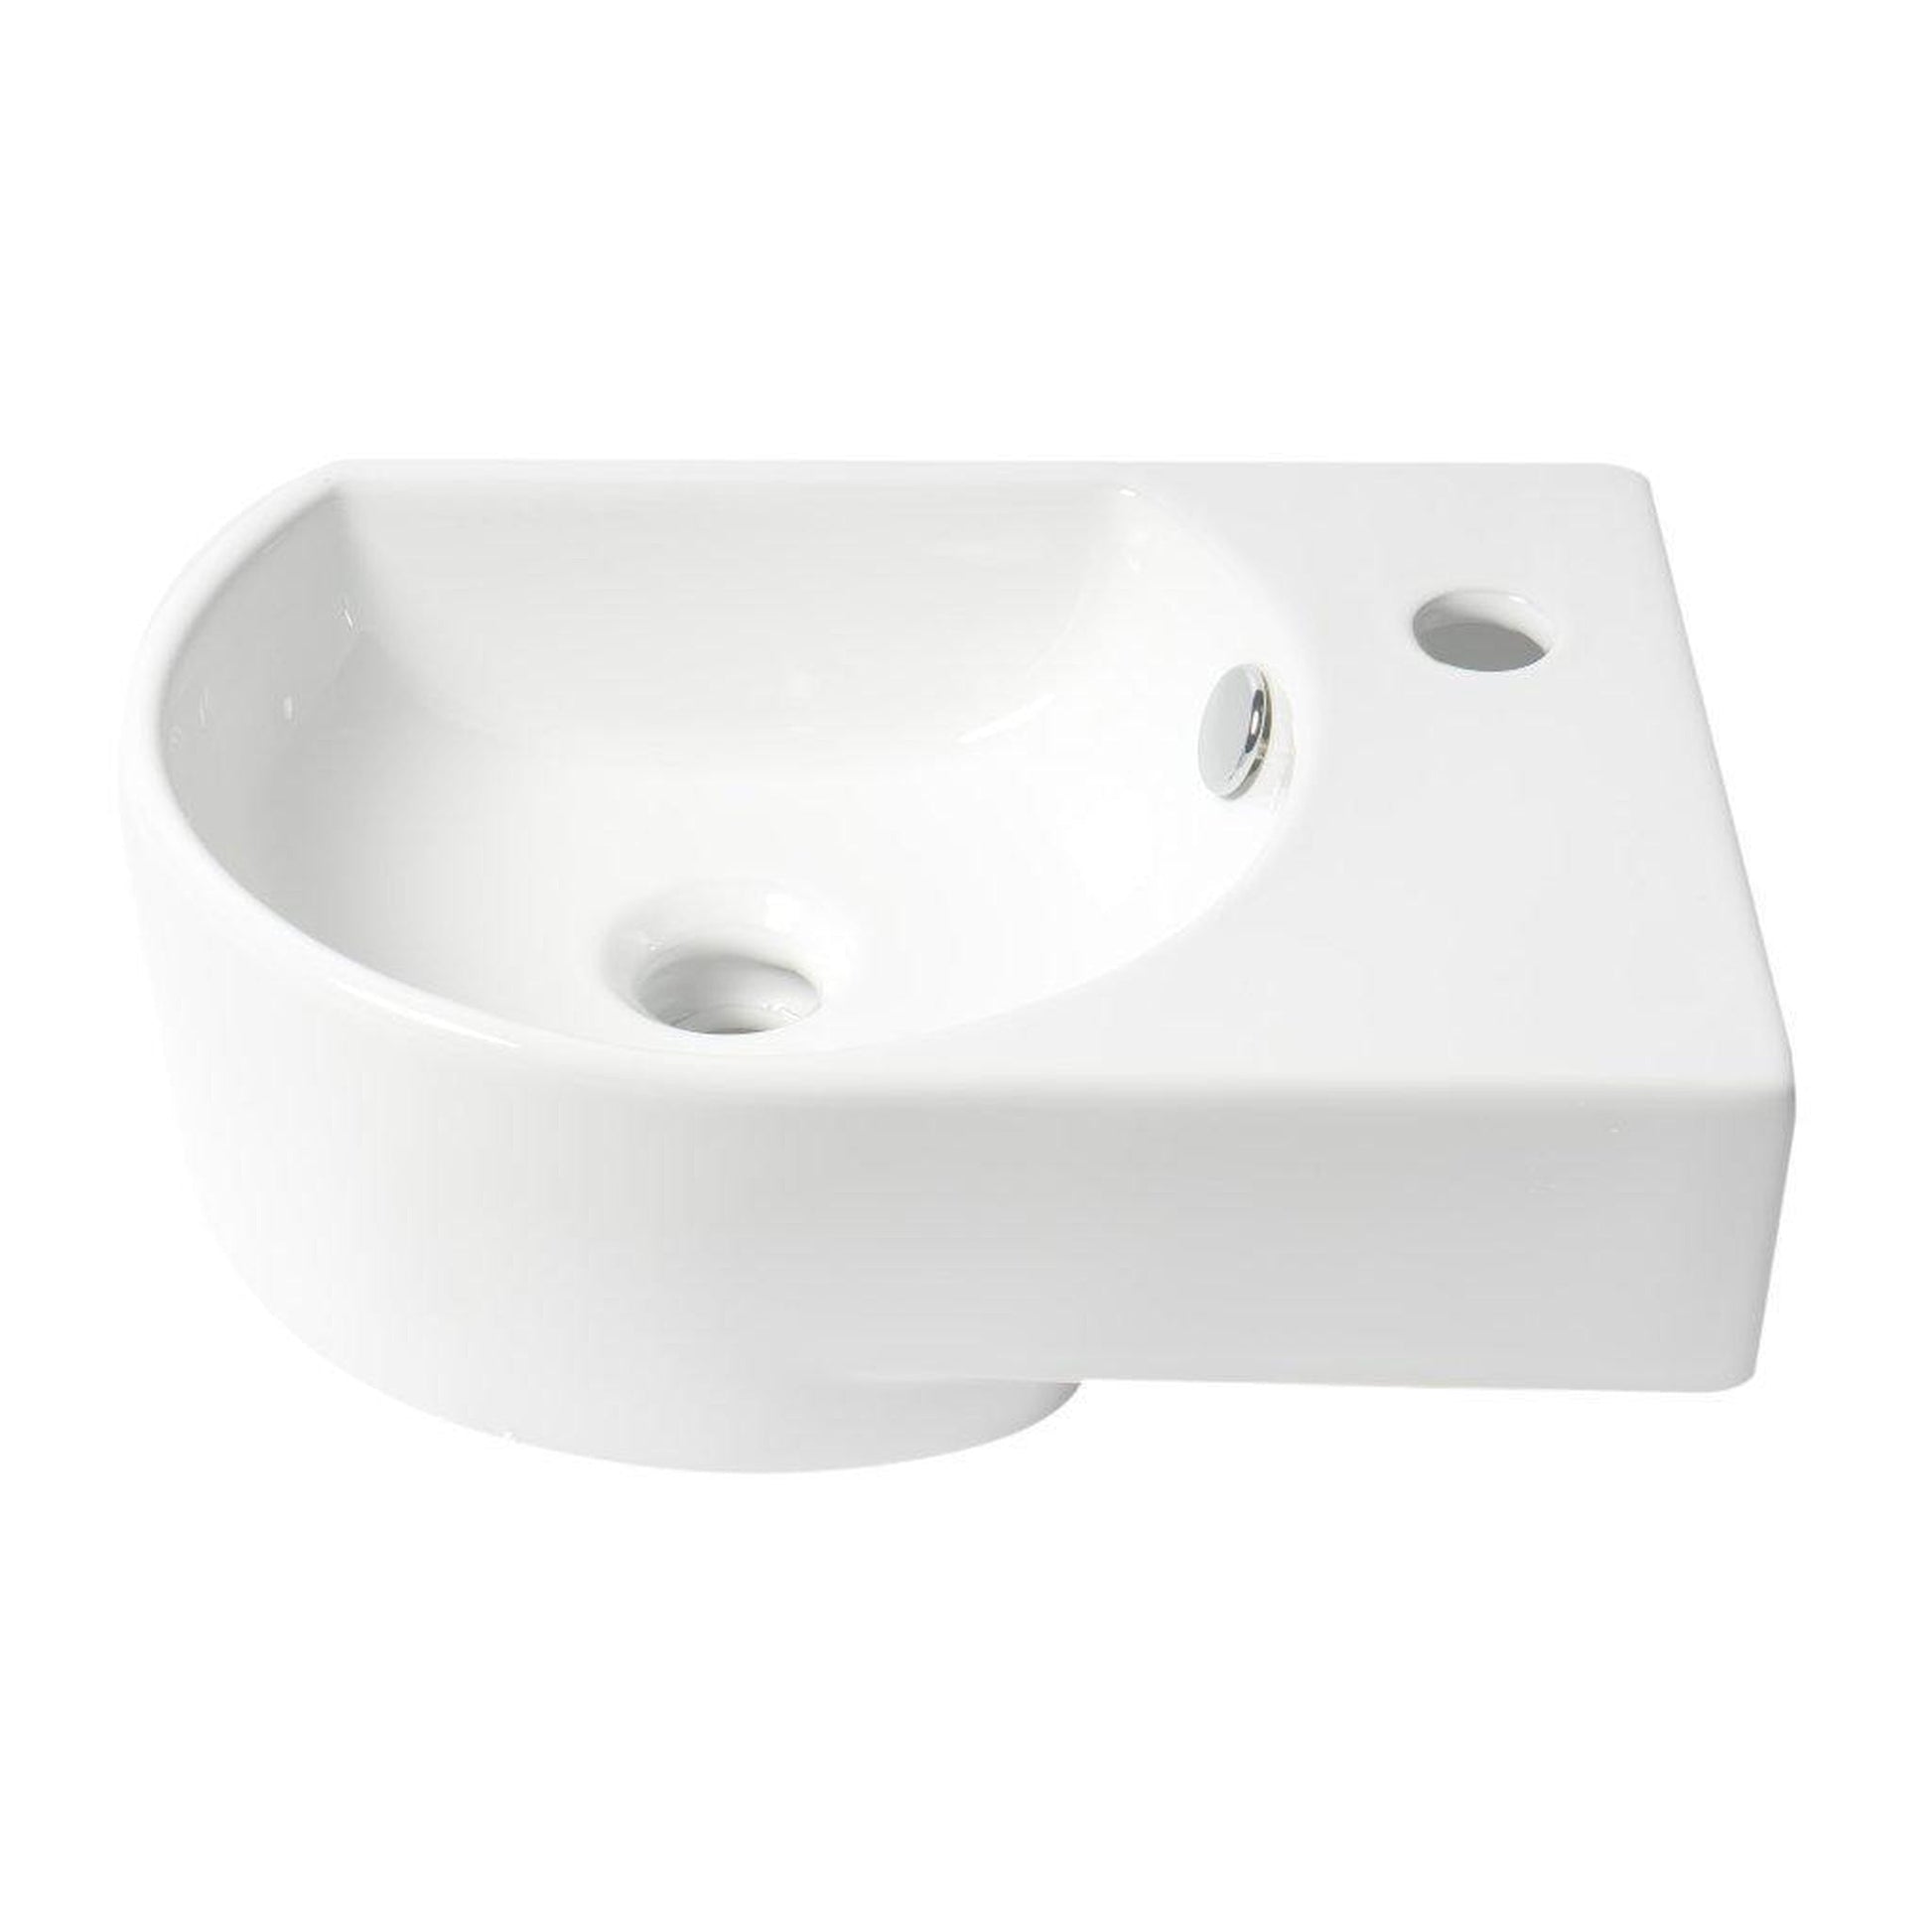 ALFI Brand ABC119 16" White Glossy Wall-Mounted U-Shaped Ceramic Bathroom Sink With Single Faucet Hole and Overflow